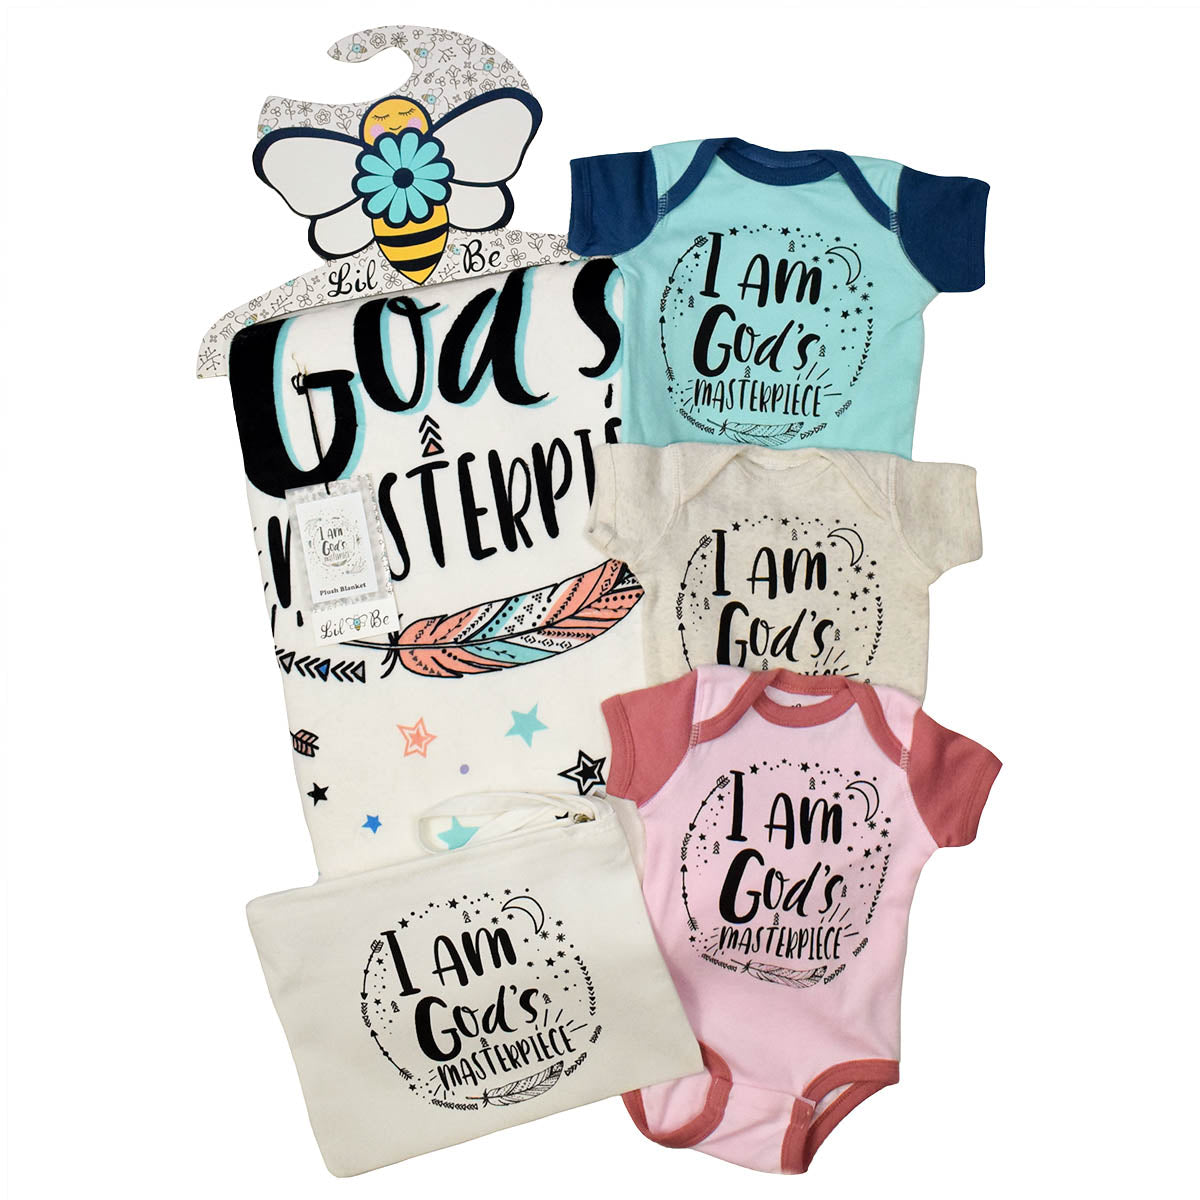 Lil Be Collection of God's Masterpiece baby essentials